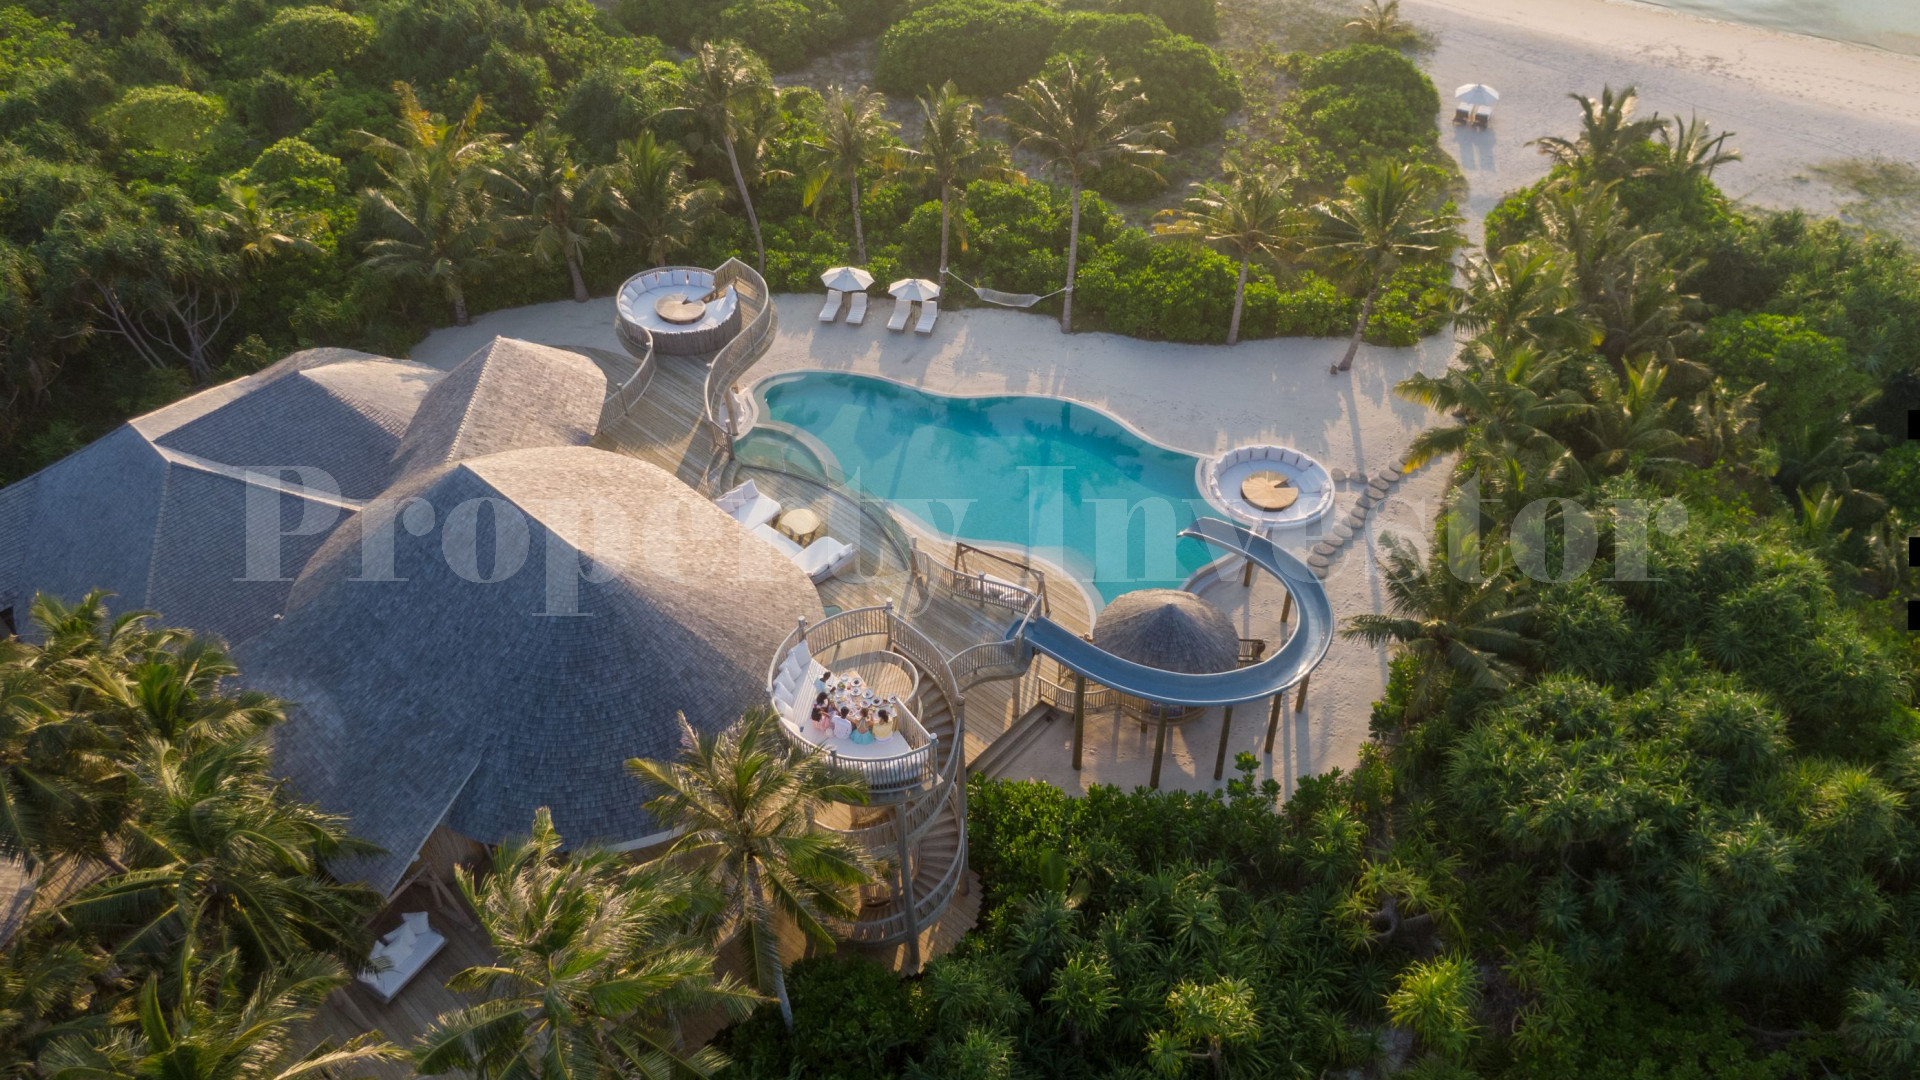 Exclusive 3 Bedroom Private Island Beach Residence with Slide for Sale in the Maldives